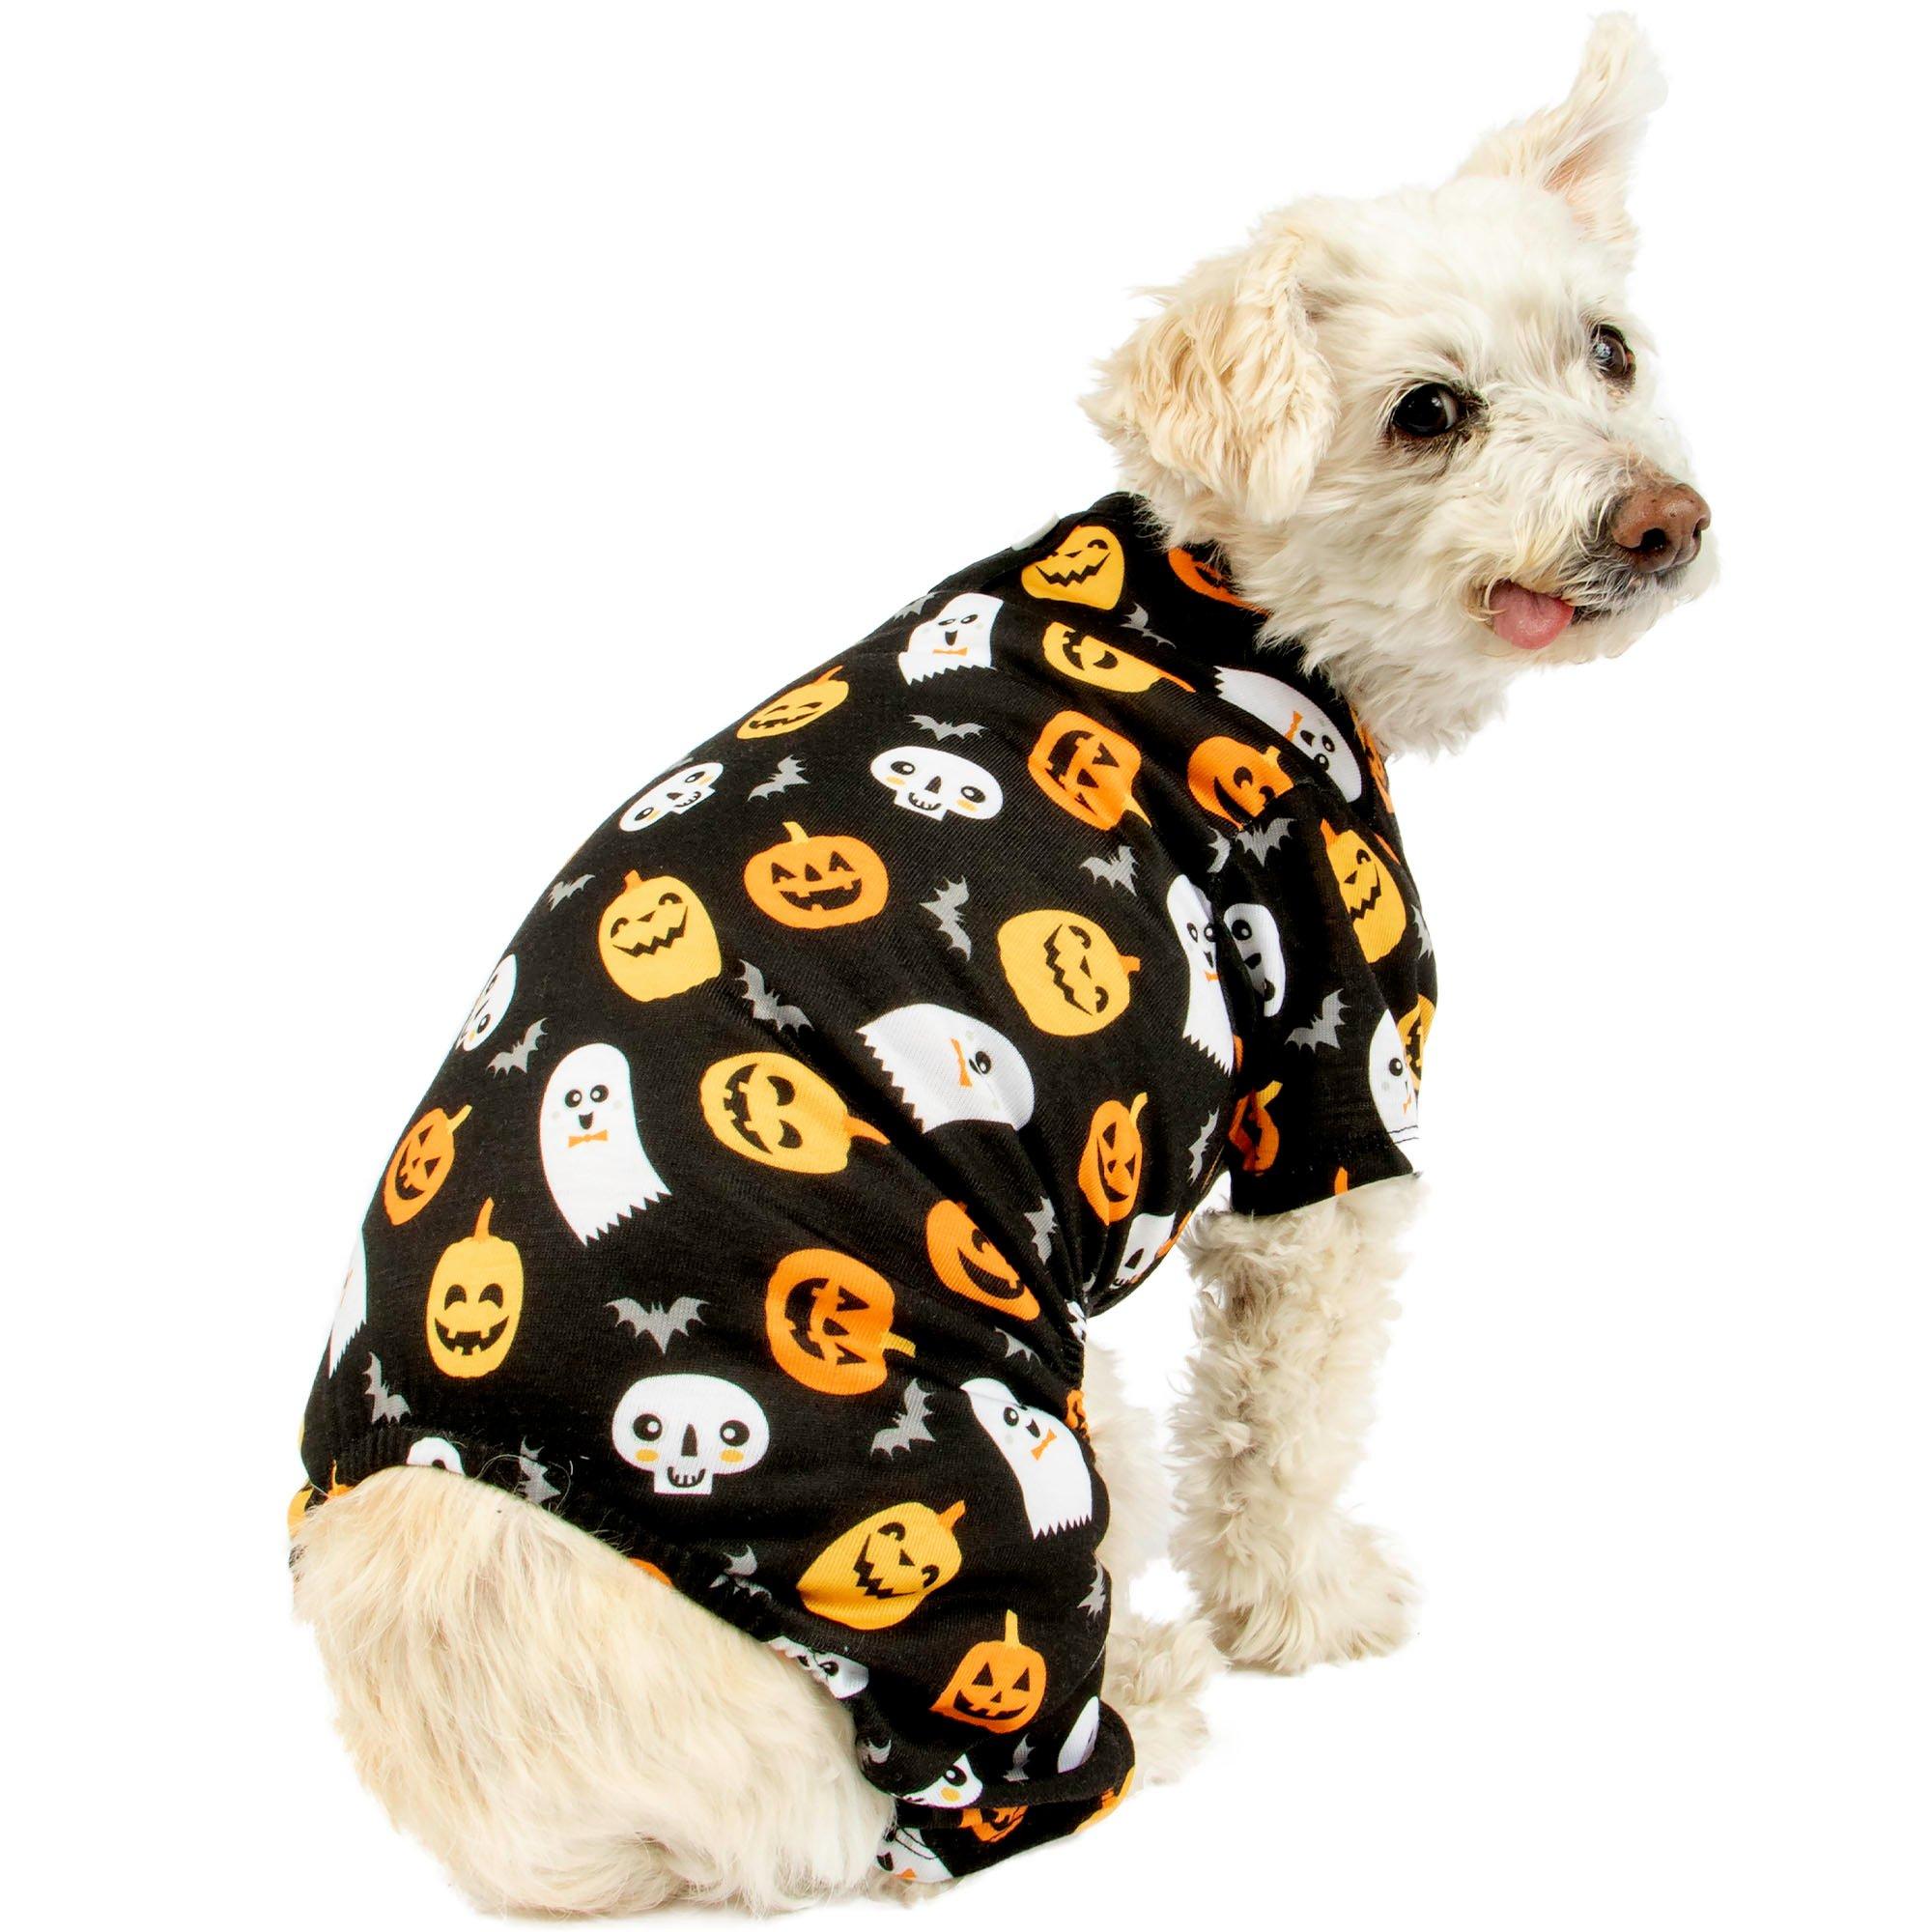 Wholesale Best NBA Dog Gear pet Apparel Clothing for All Sports